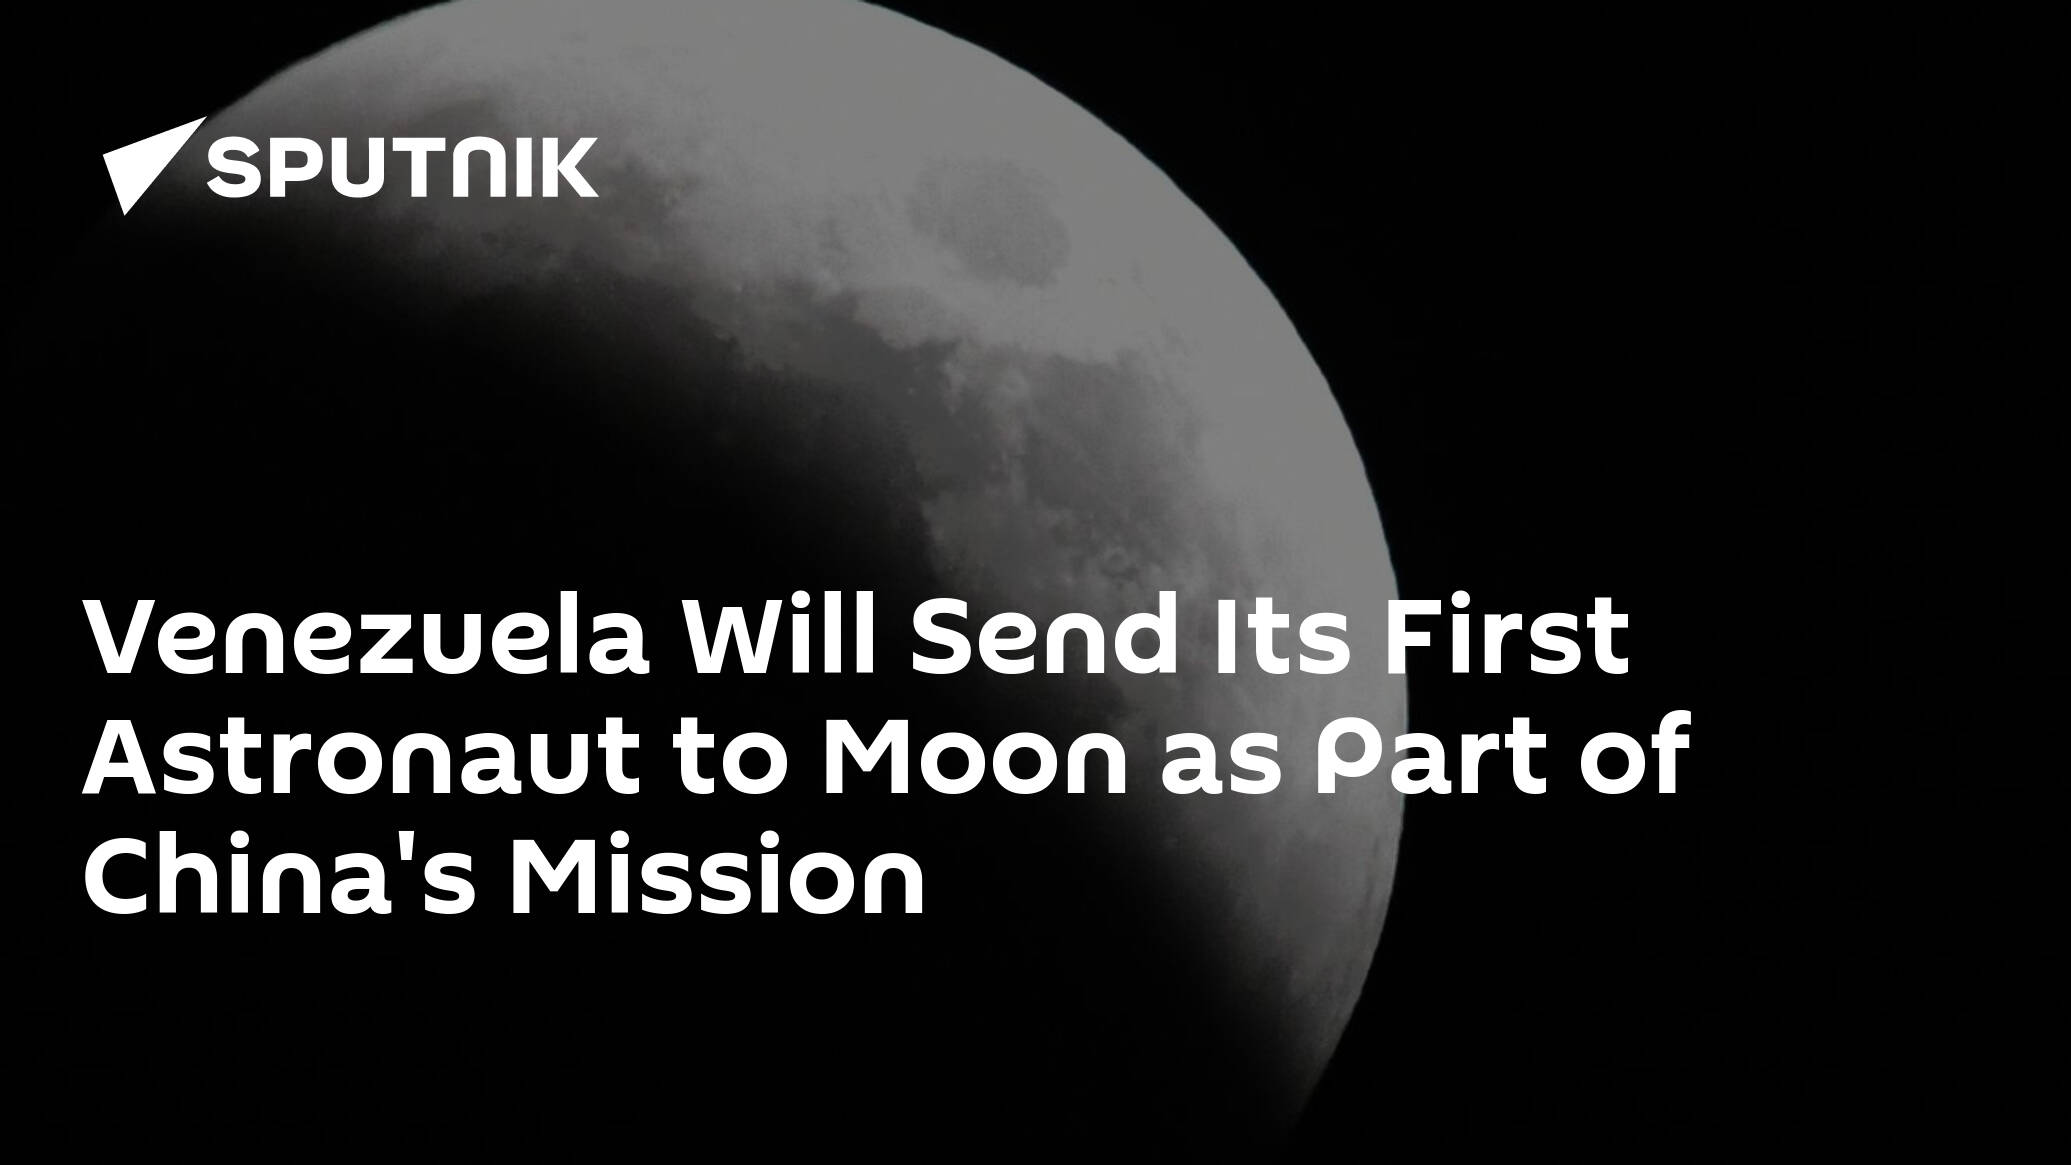 Venezuela Will Send Its First Astronaut to Moon as Part of China's Mission